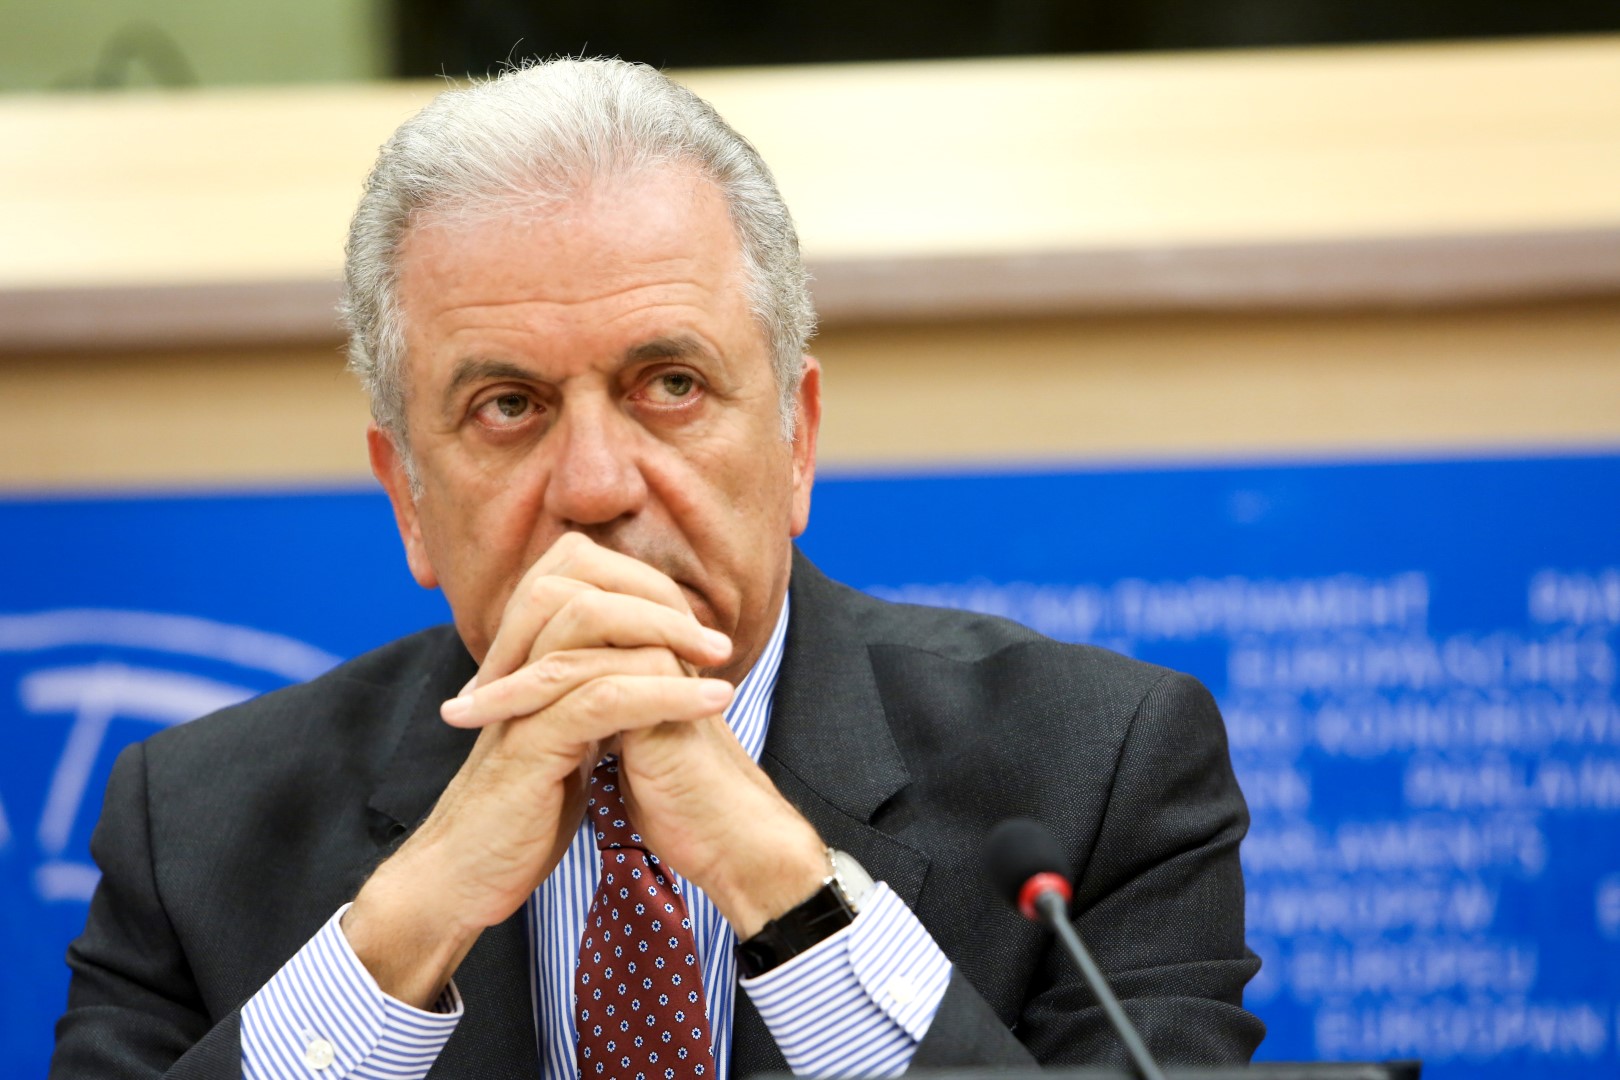 LIBE committee meeting.Situation in the Mediterranean and the need for a holistic approach to migration - discussion with Dimitris AVRAMOPOULOS, European Commissioner for Migration, Home Affairs and Citizenship.